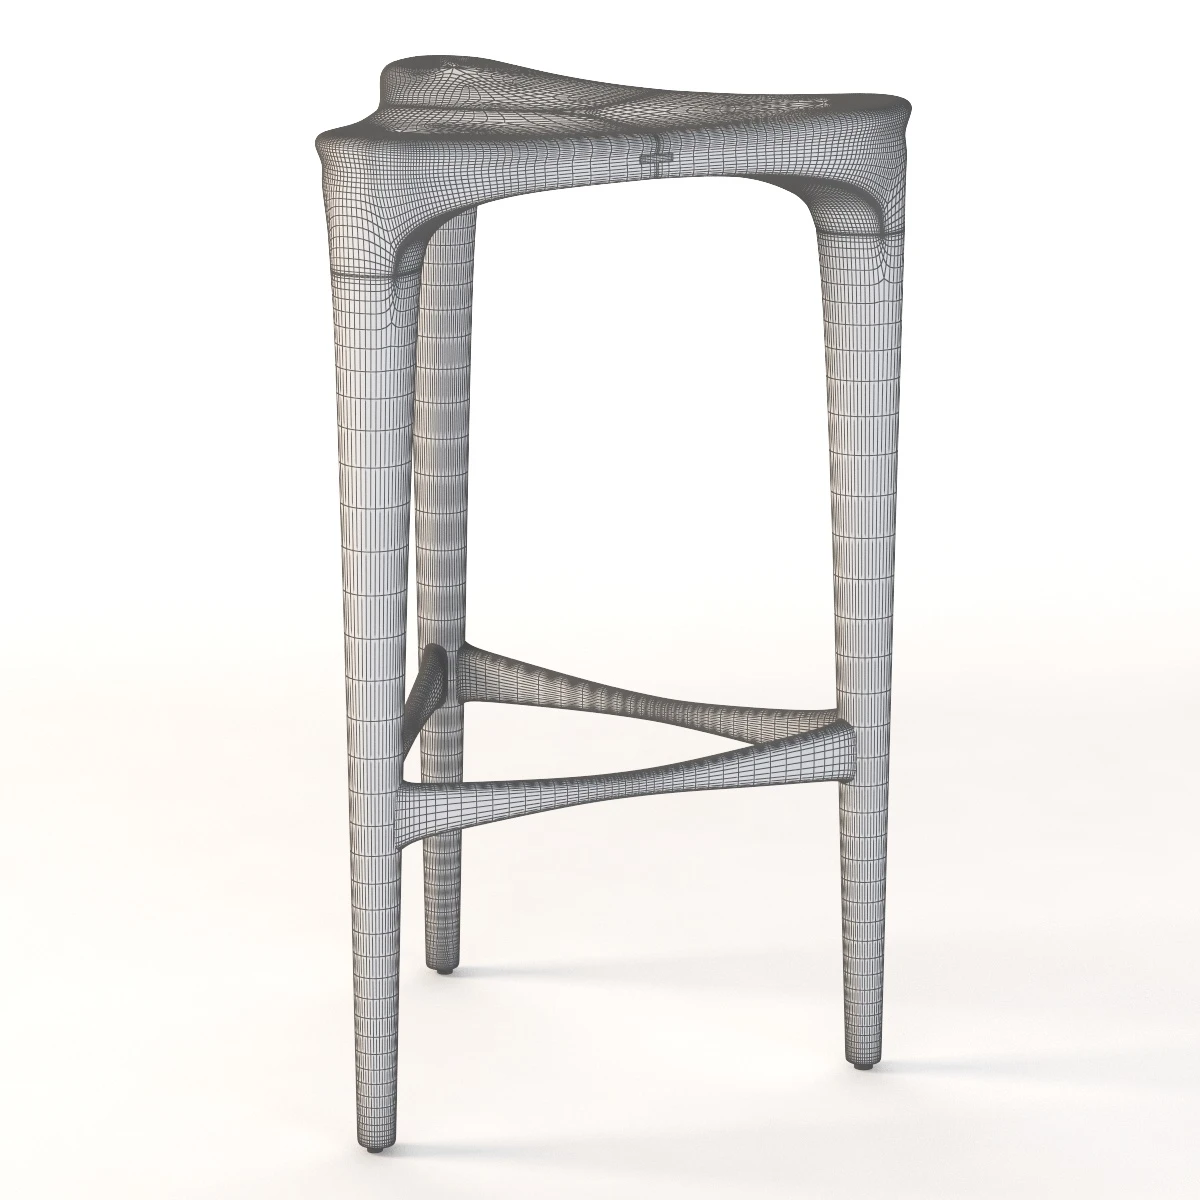 2 By 3 Wood Stools Geiger 3D Model_011